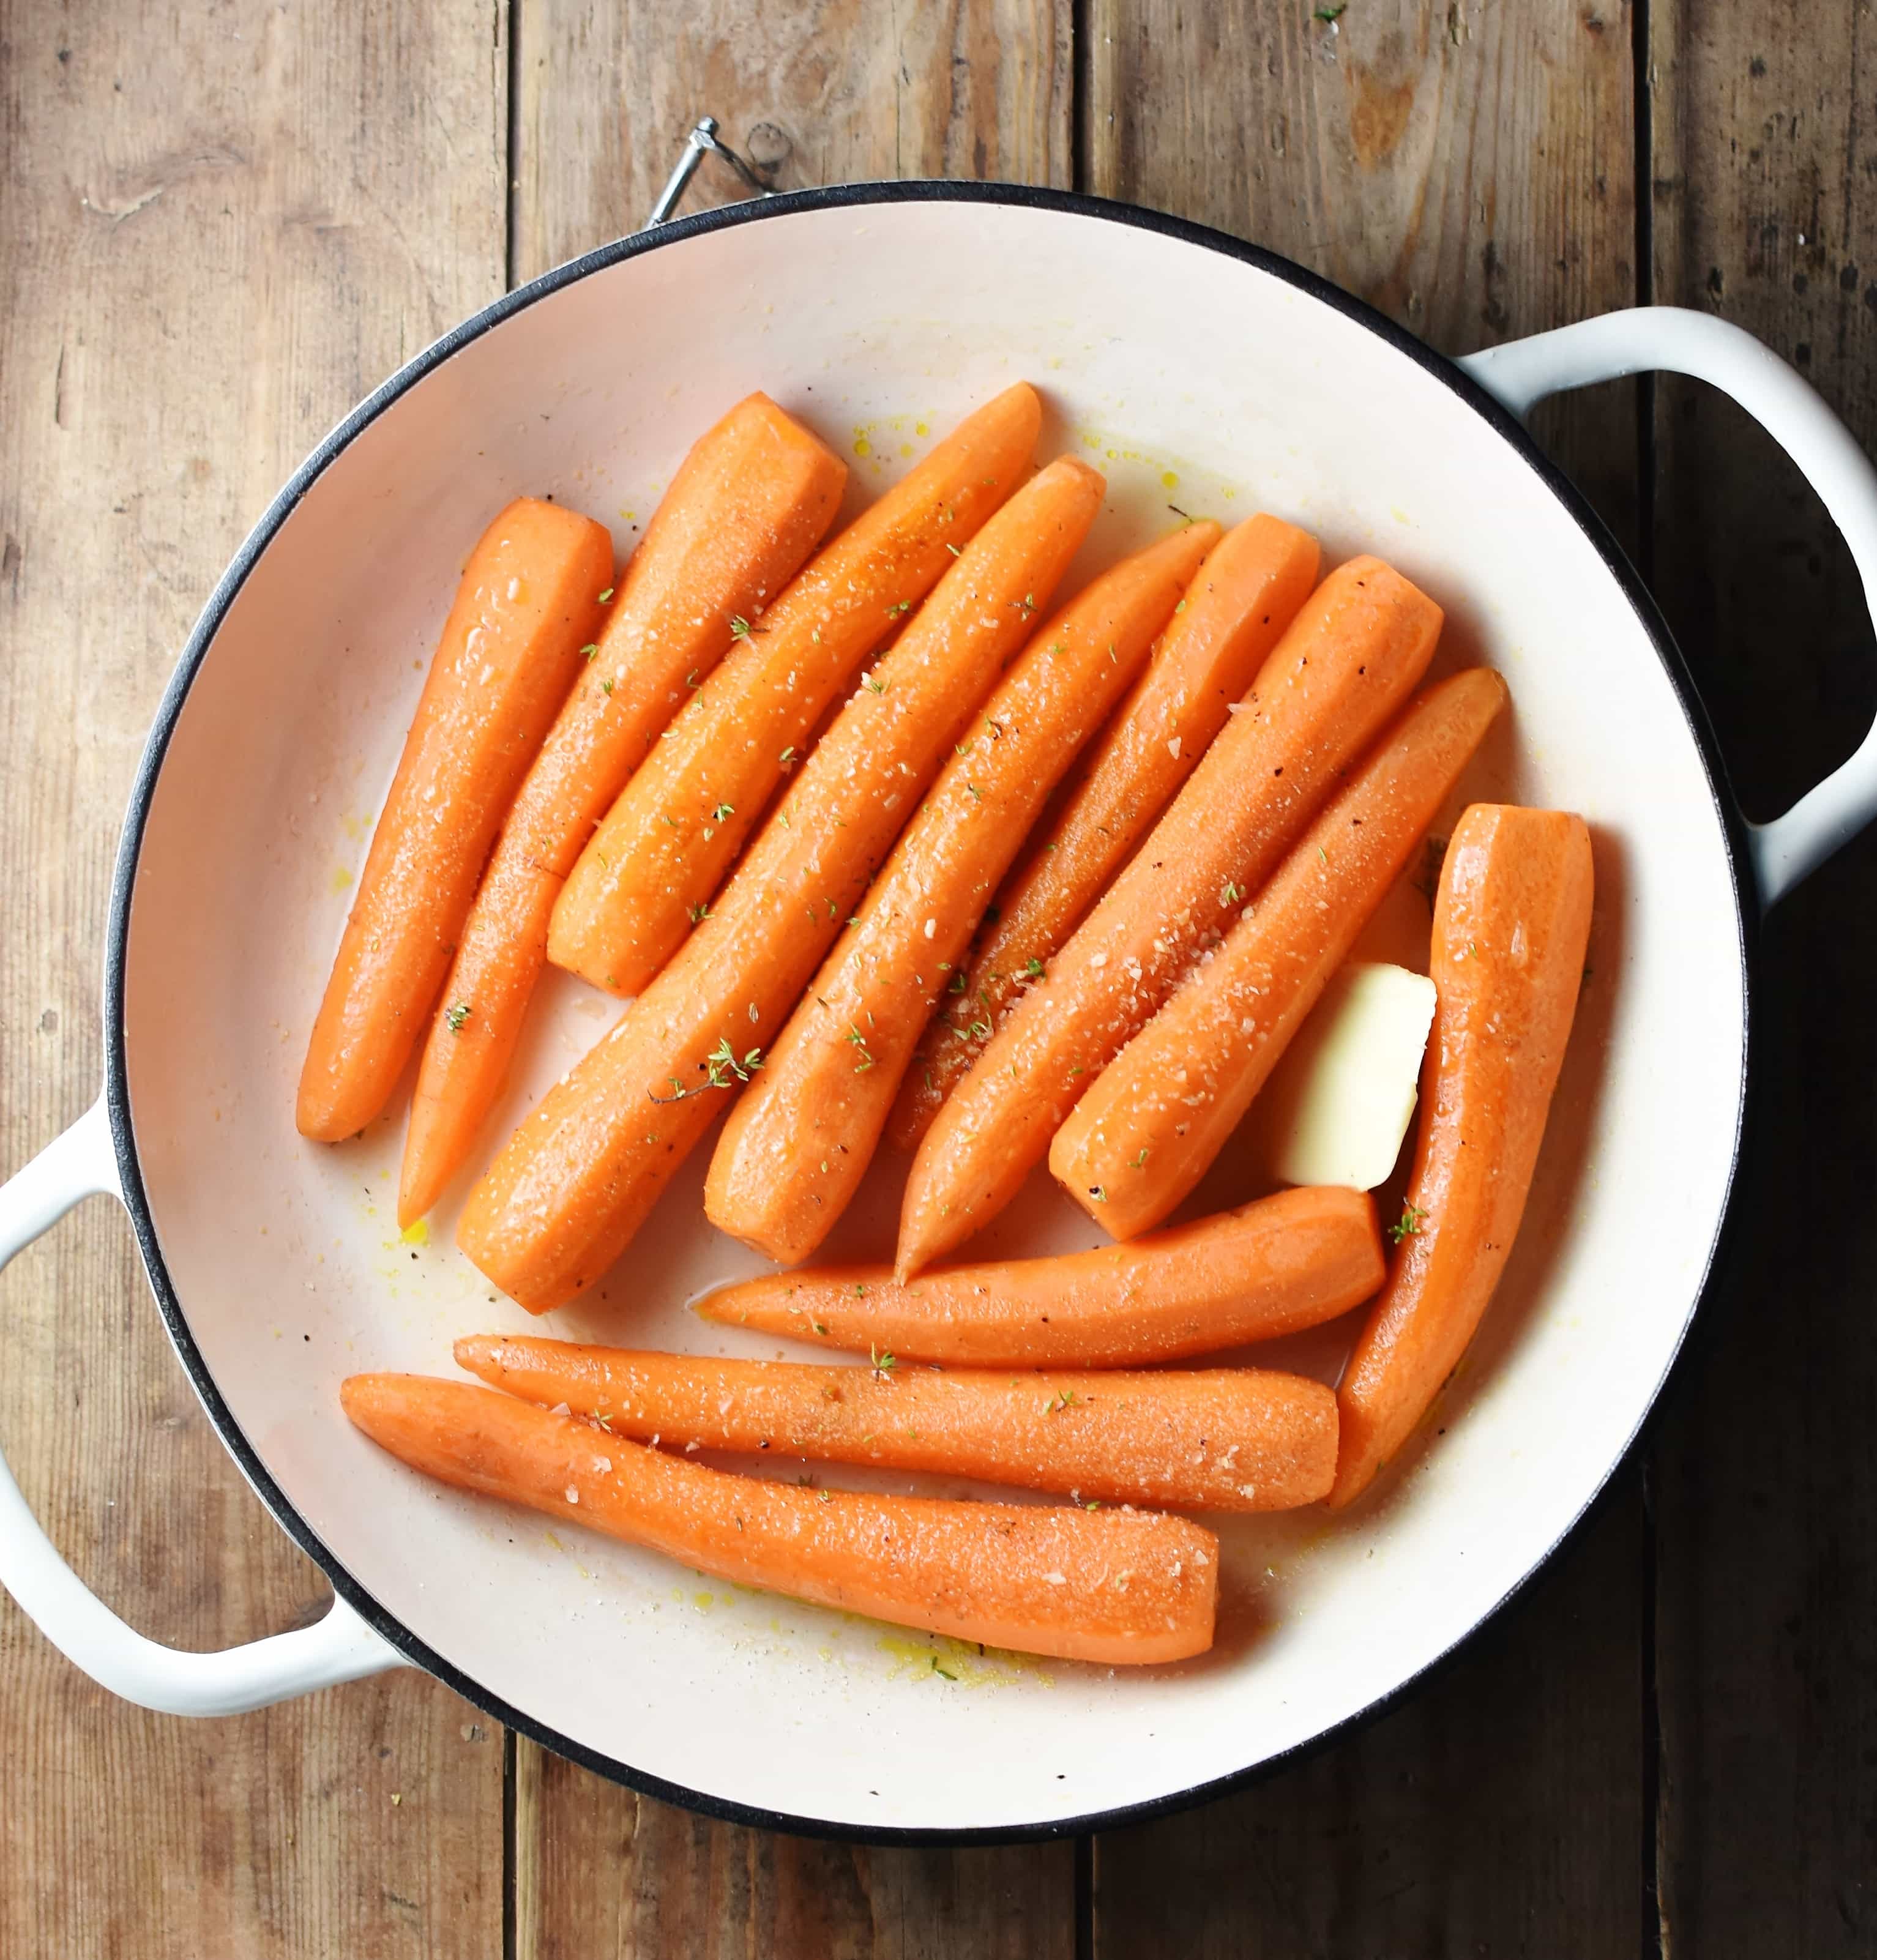 Braised carrots with knob of butter and seasoning in large white pan.